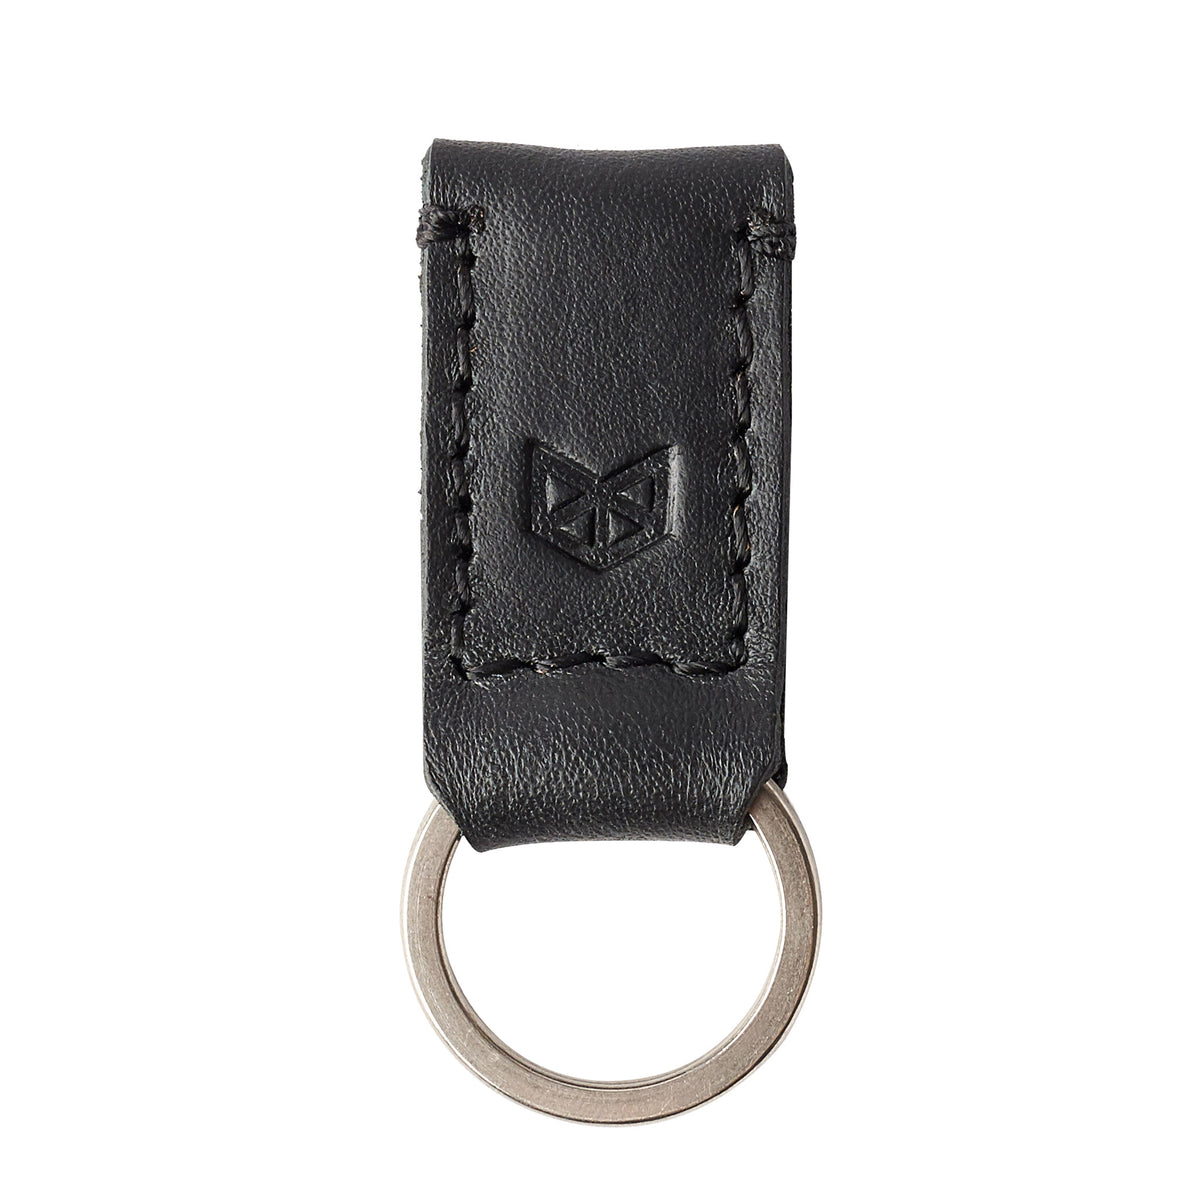 Black leather keychain, magnetic key fob for mens gifts